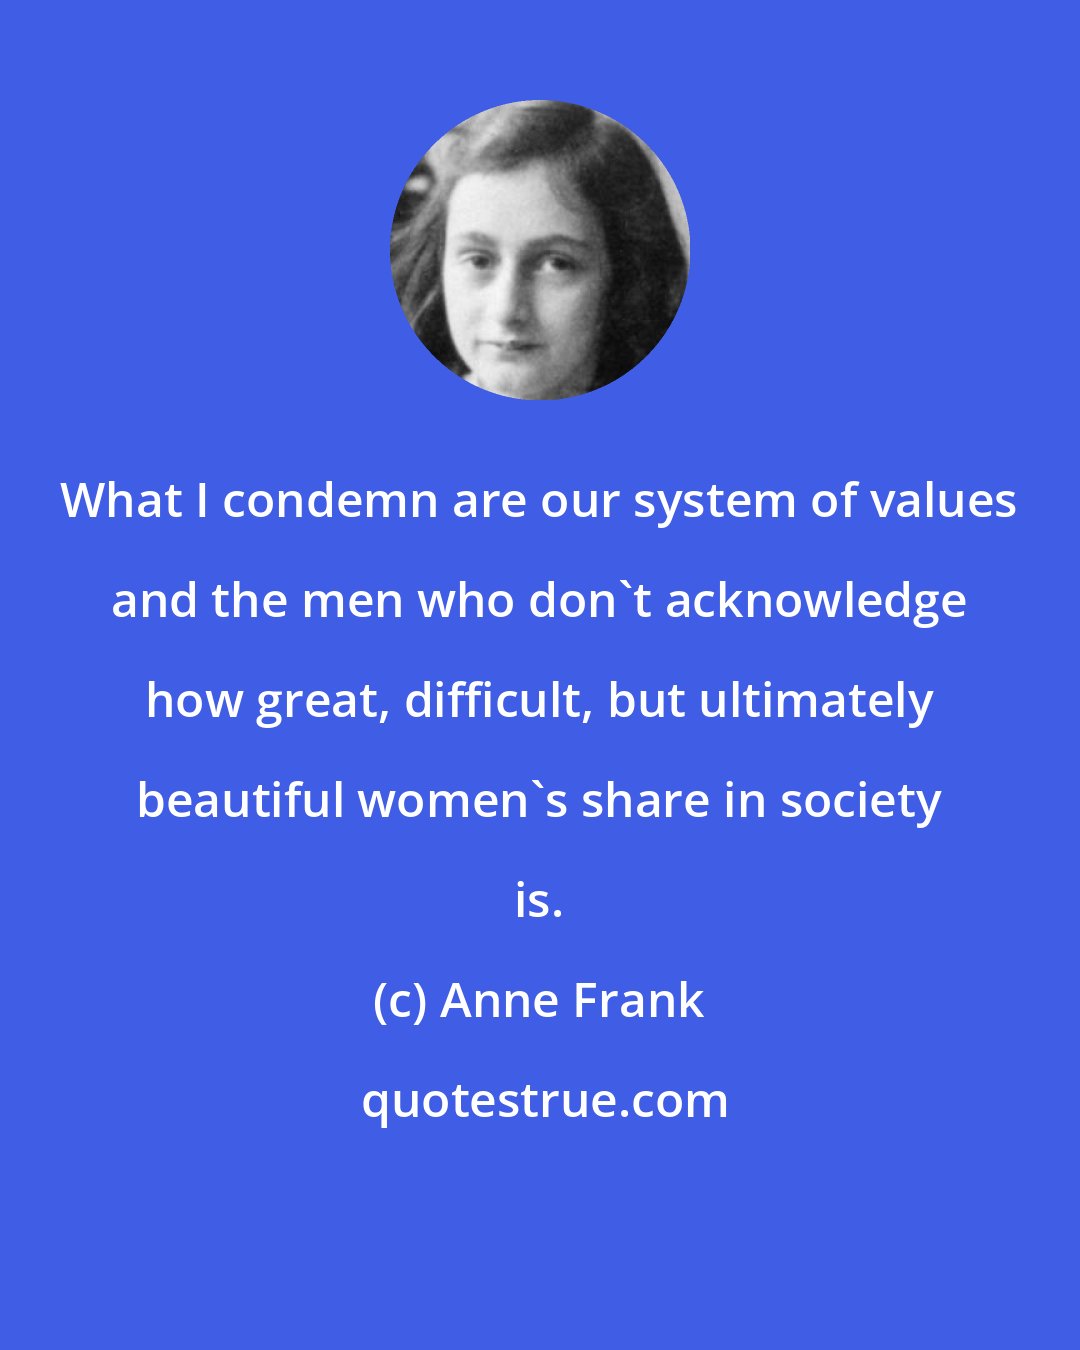 Anne Frank: What I condemn are our system of values and the men who don't acknowledge how great, difficult, but ultimately beautiful women's share in society is.